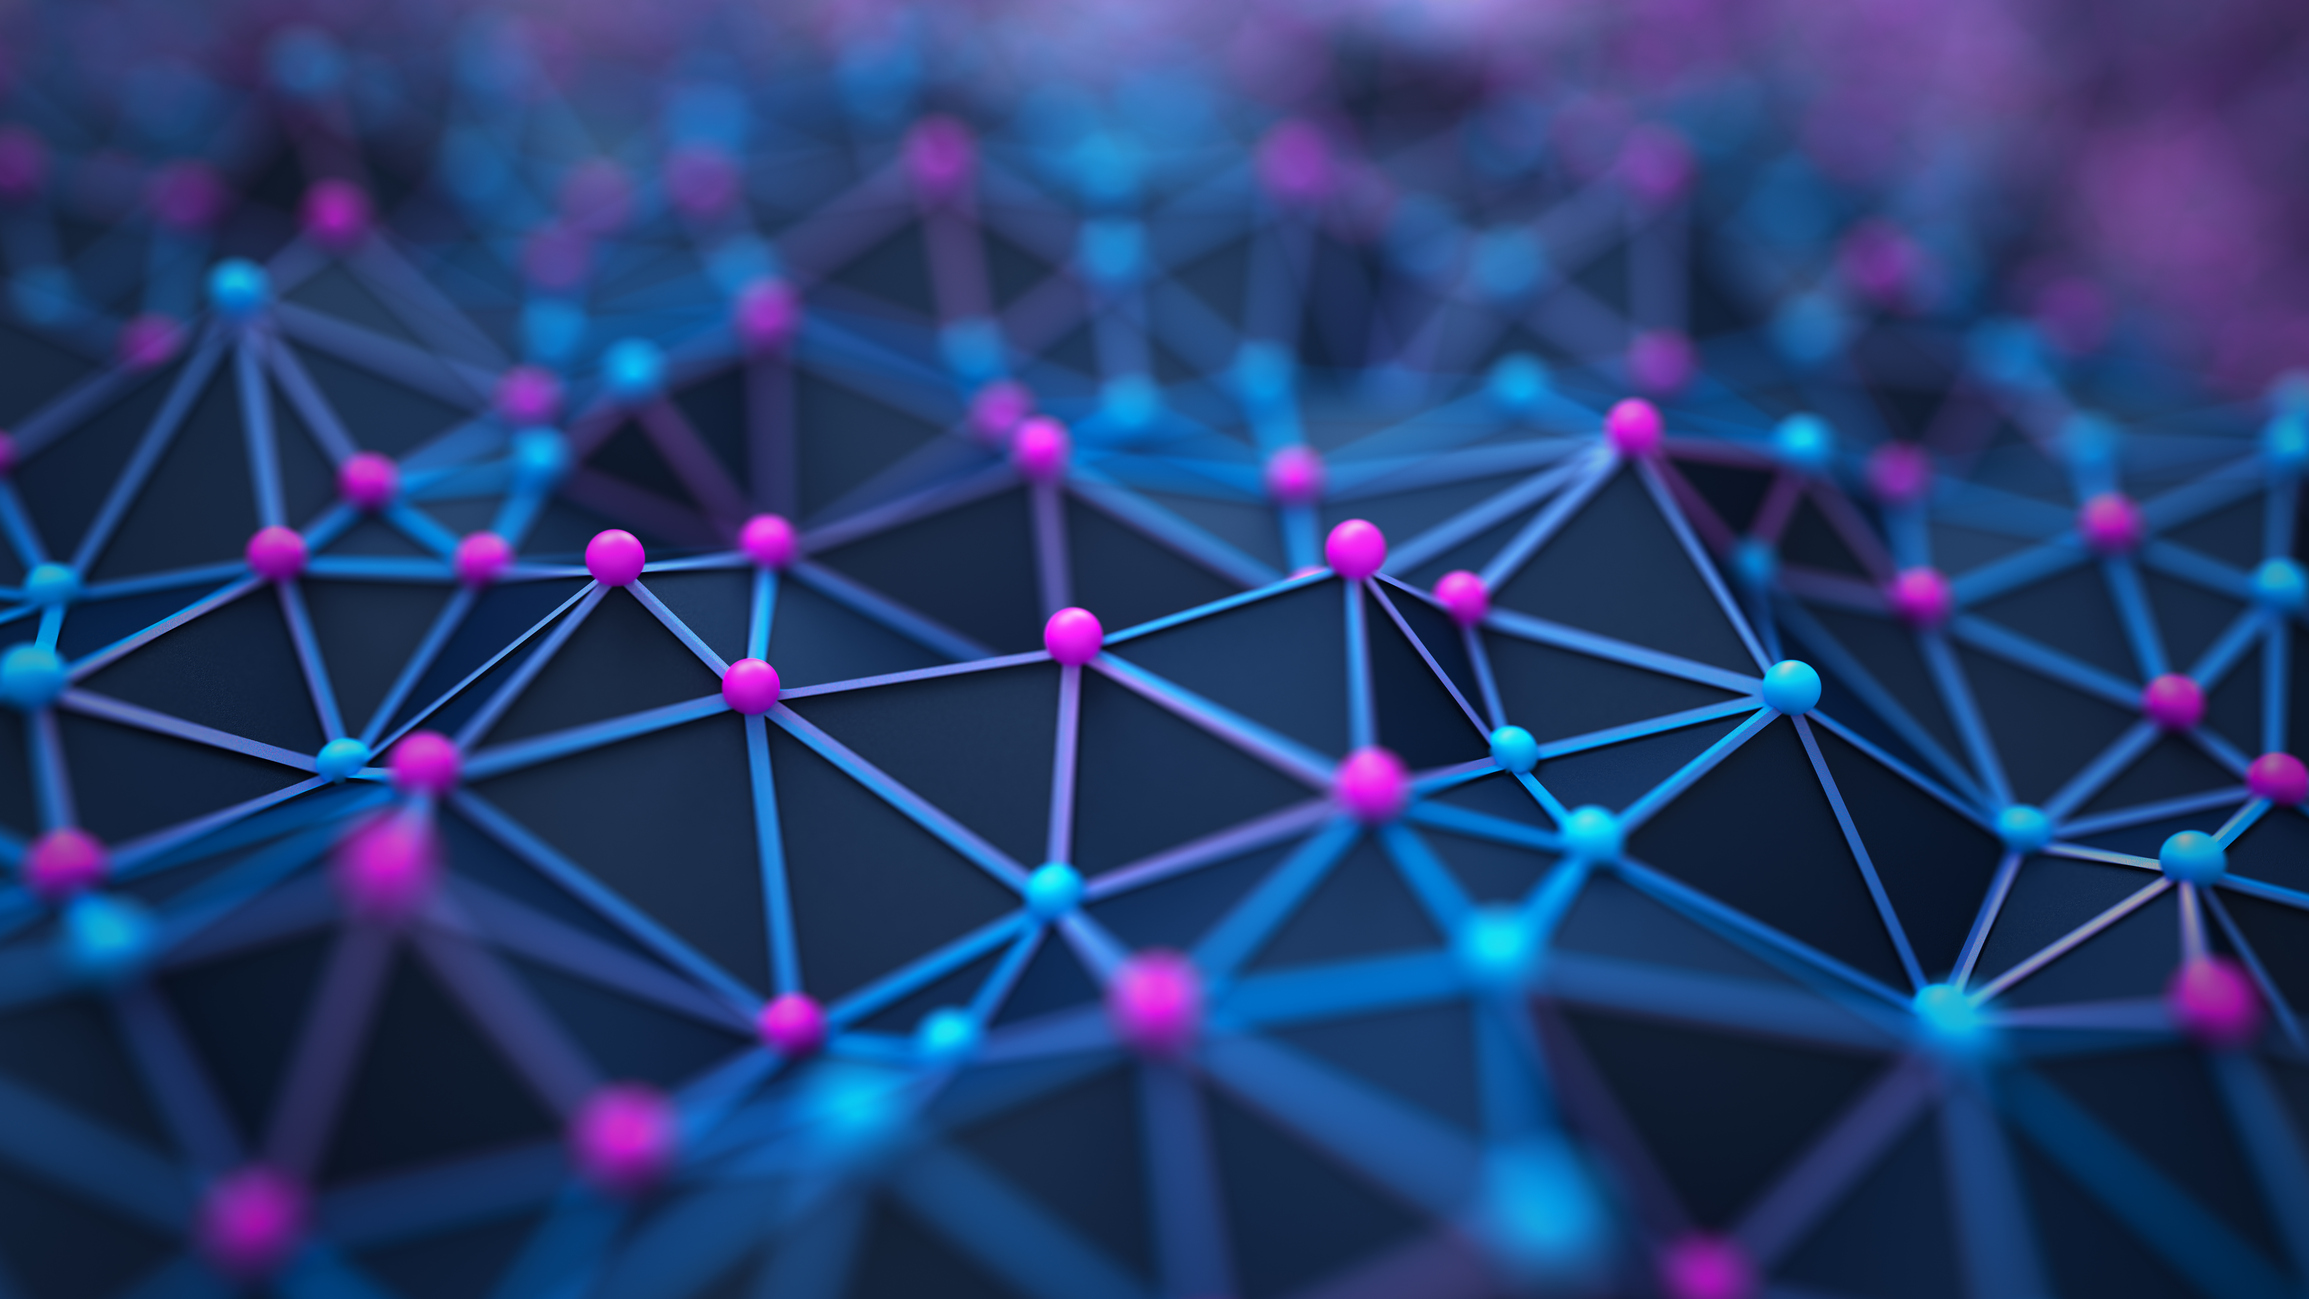 Futuristic digital blockchain background. Abstract connections technology and digital network. 3d illustration of the Big data and communications technology.